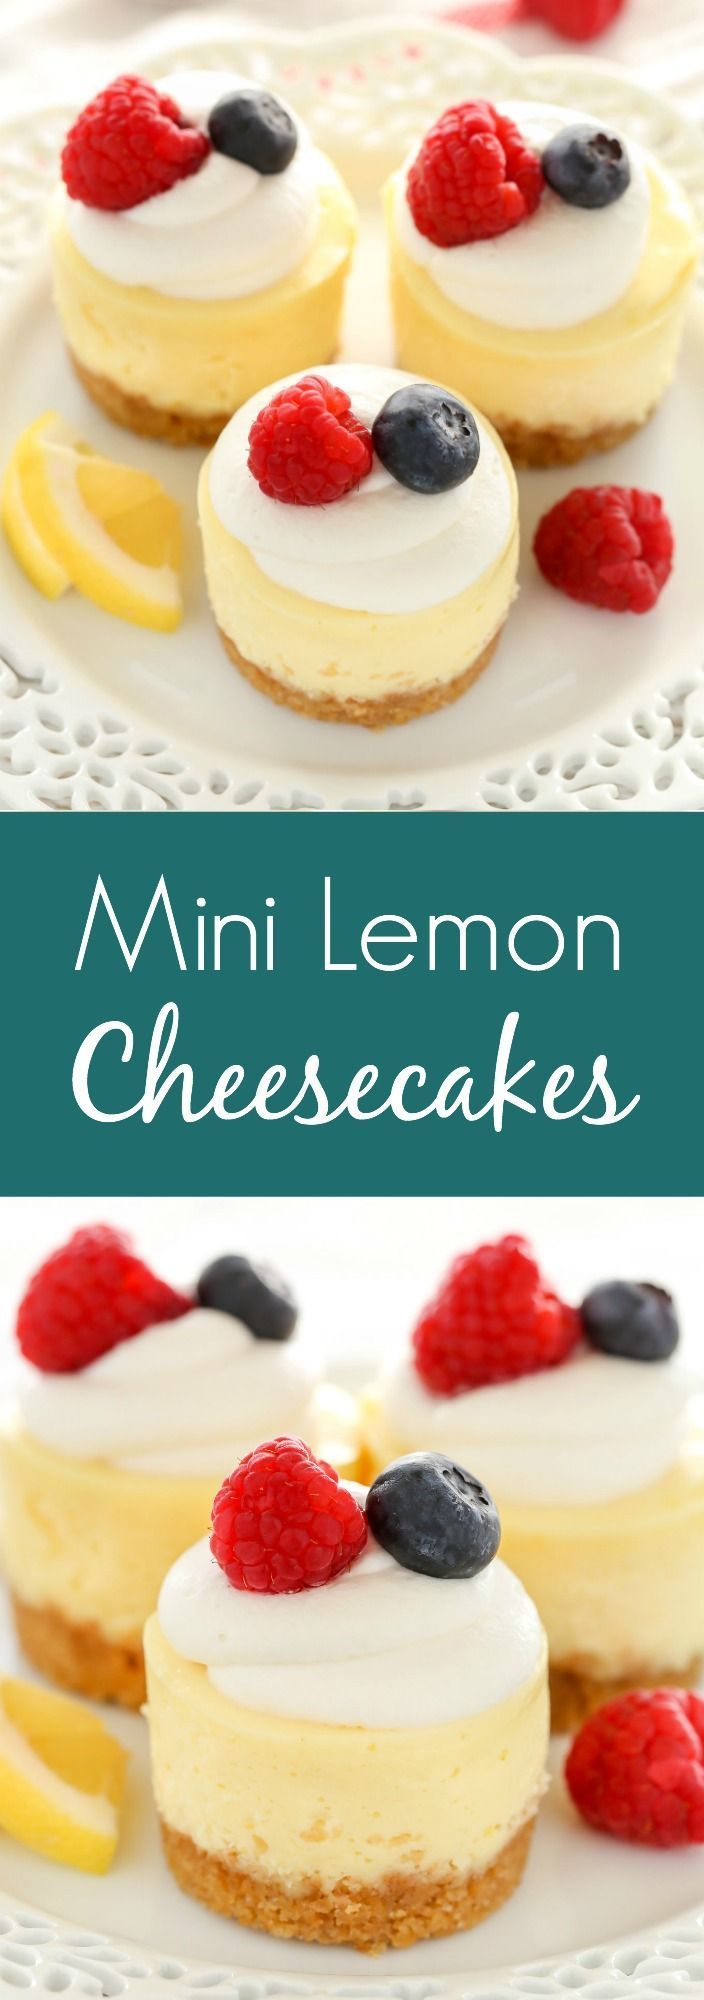 These Mini Lemon Cheesecakes feature an easy homemade graham cracker crust topped with a smooth and creamy lemon cheesecake filling. Top them with some fresh whipped cream and berries for an easy dessert everyone will love! -   23 lemon cheesecake recipes ideas